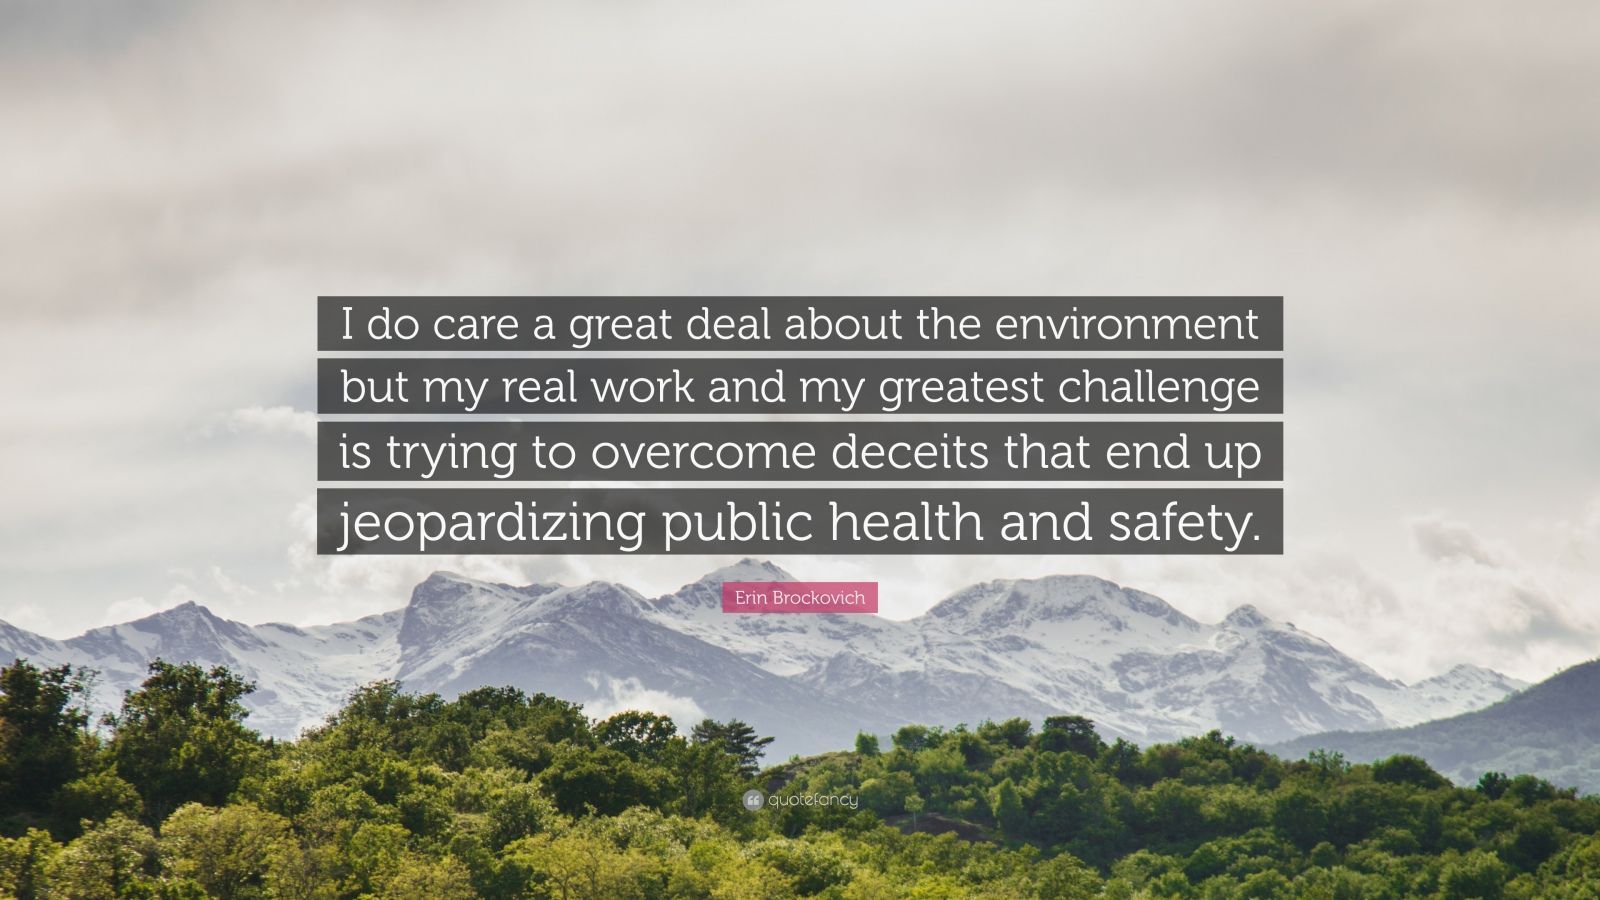 Erin Brockovich Quote: “I do care a great deal about the environment but my real work and my greatest challenge is trying to overcome deceits th.” (7 wallpaper)